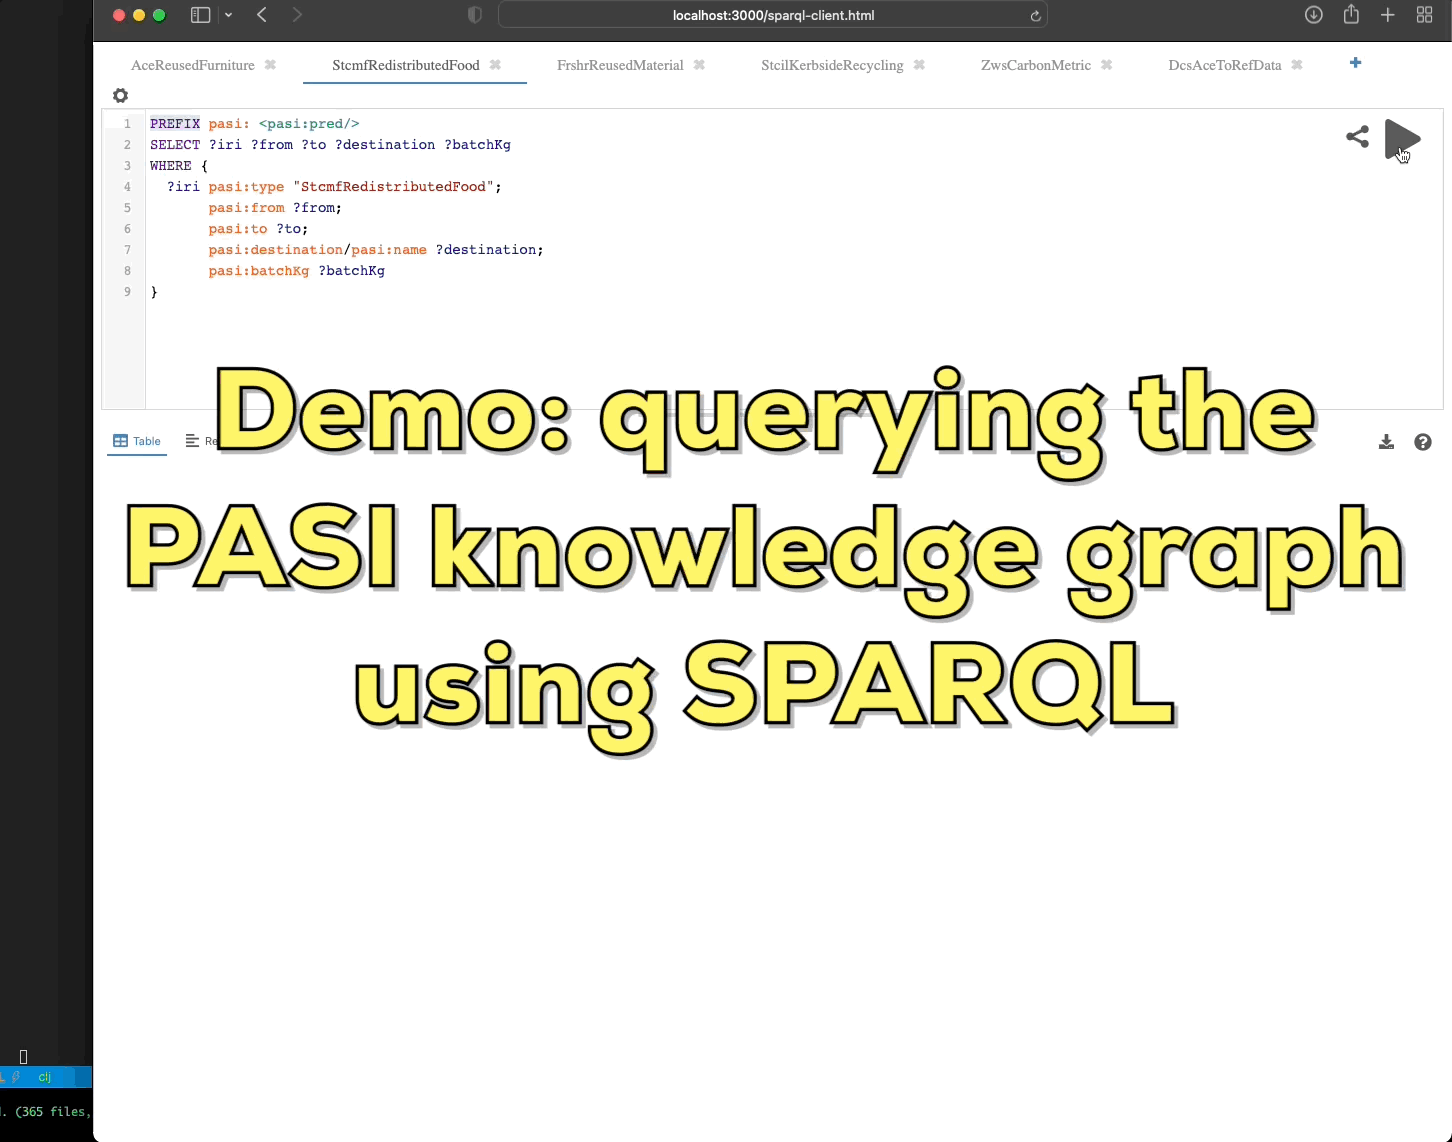 Demo: querying the PASI knowledge graph using SPARQL